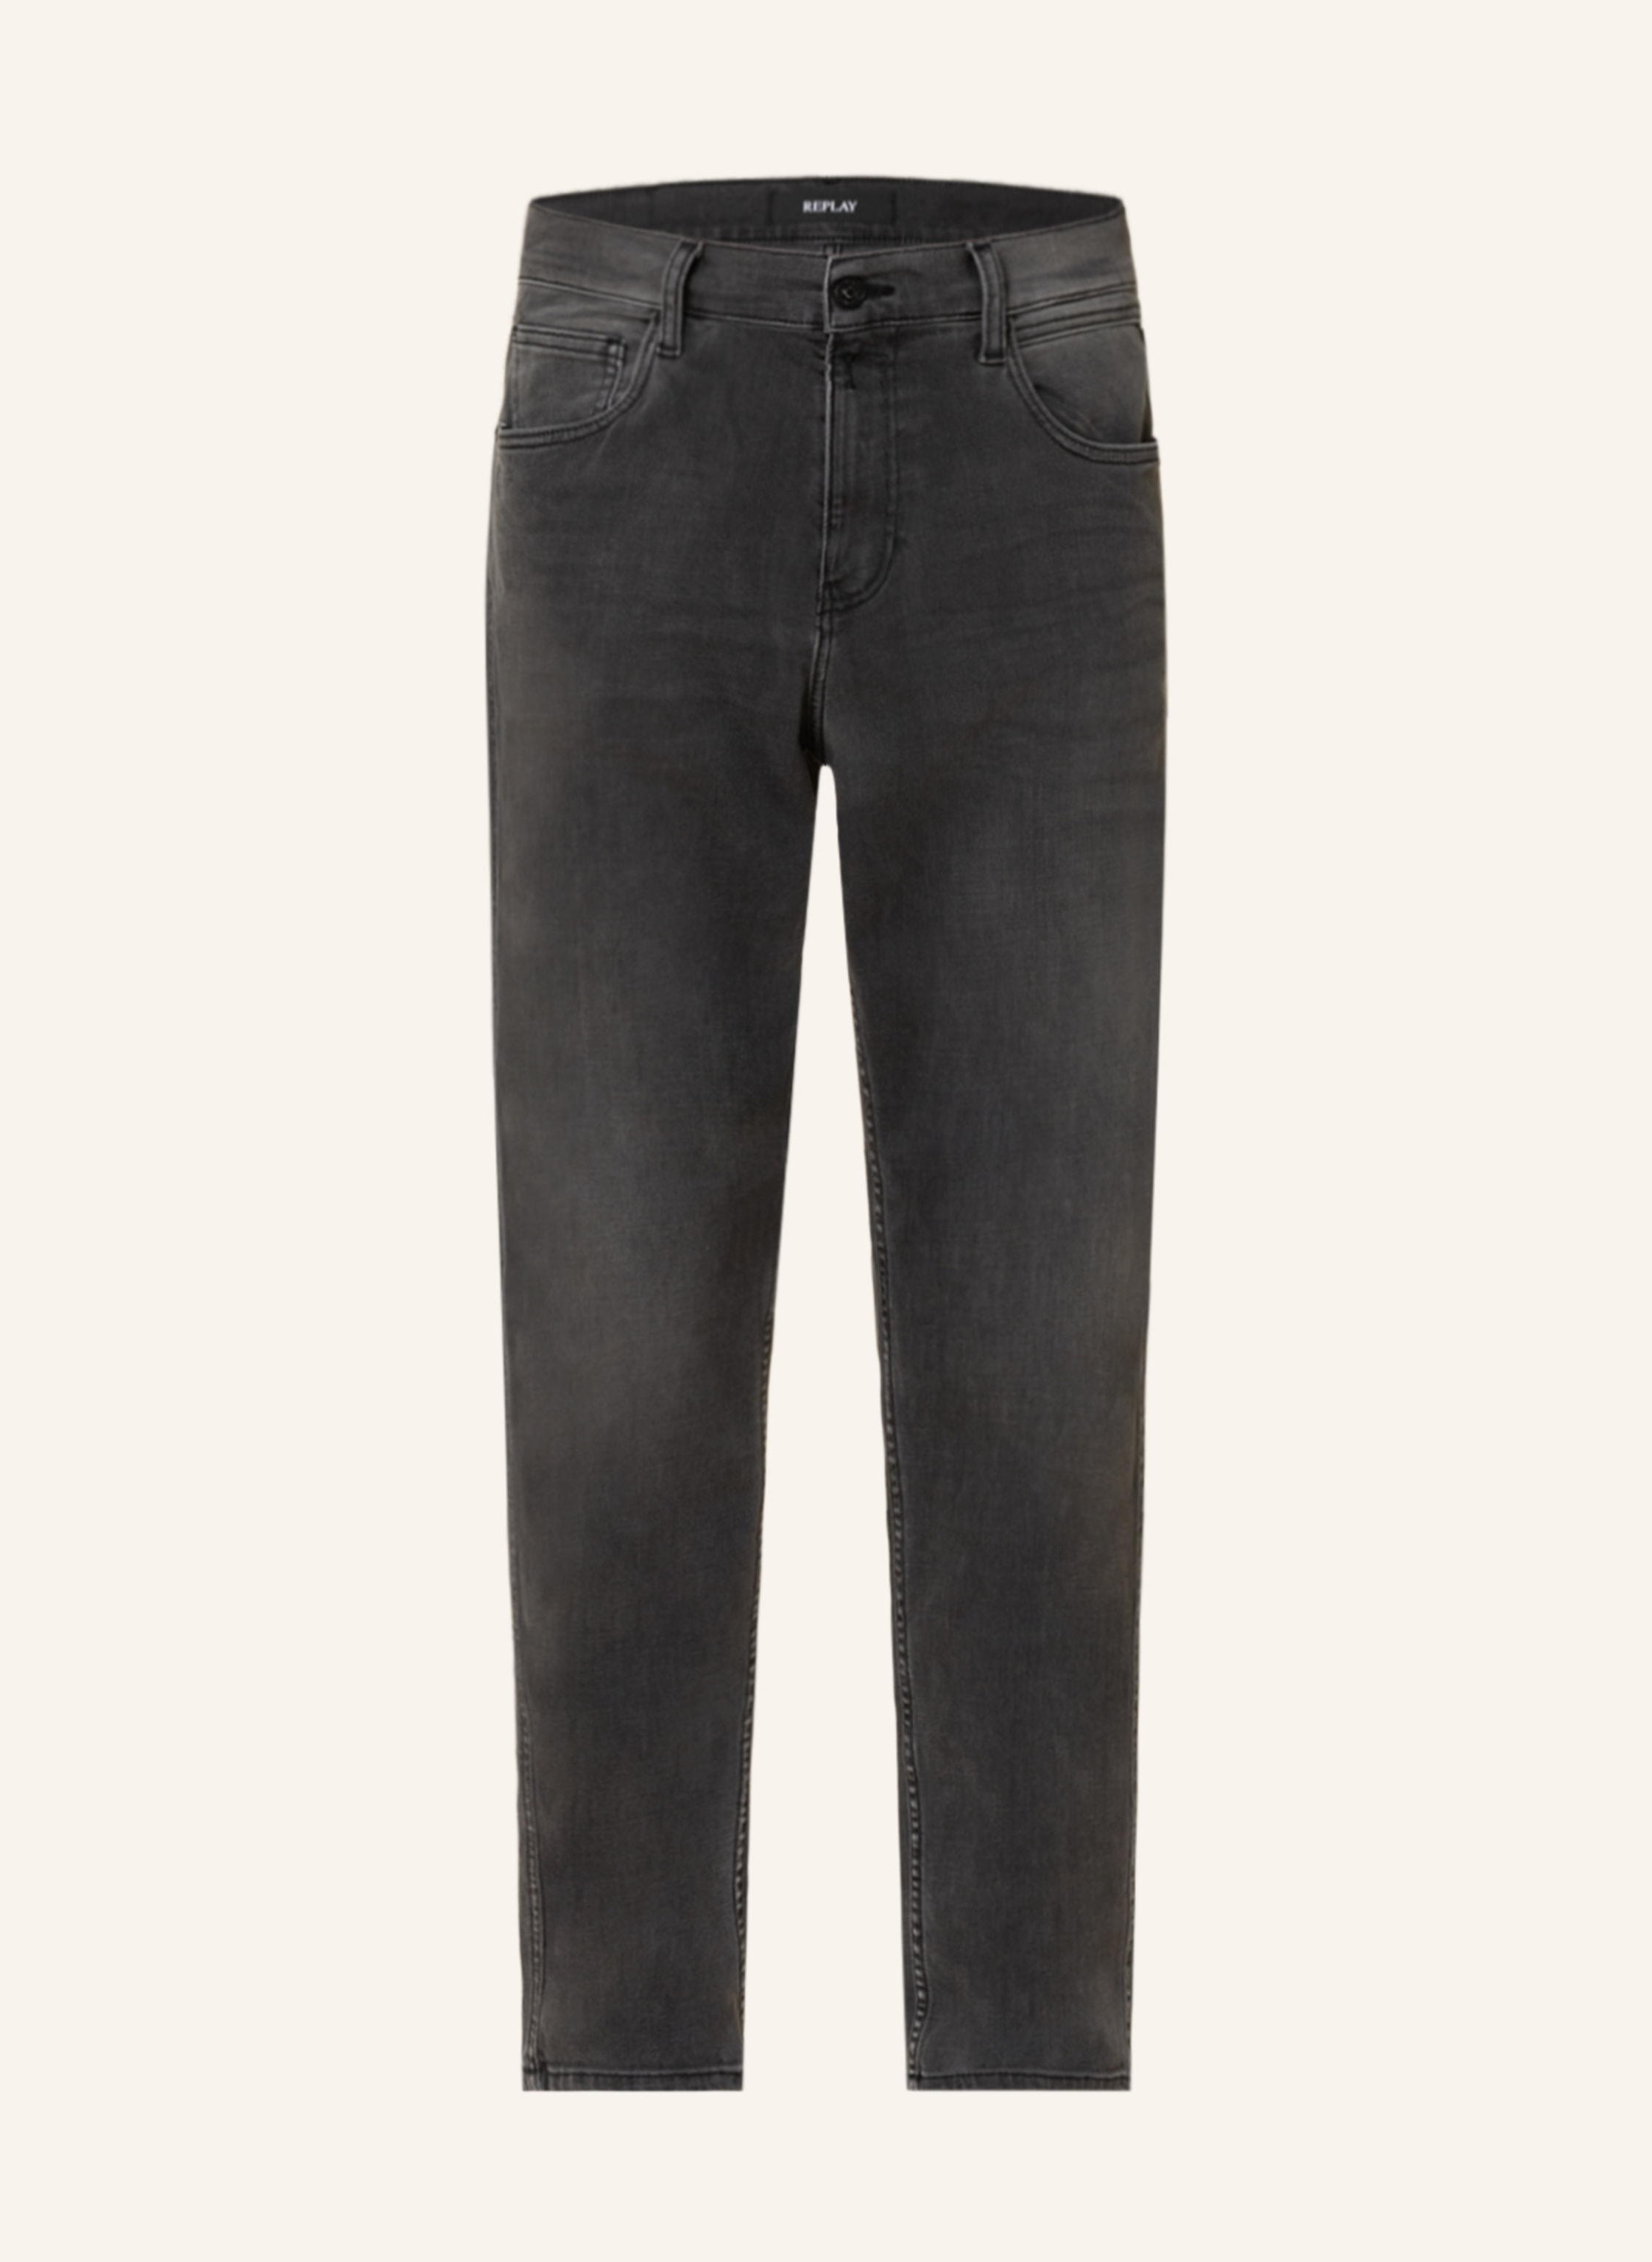 REPLAY Jeans SANDOT relaxed tapered fit in 097 dark grey | Breuninger